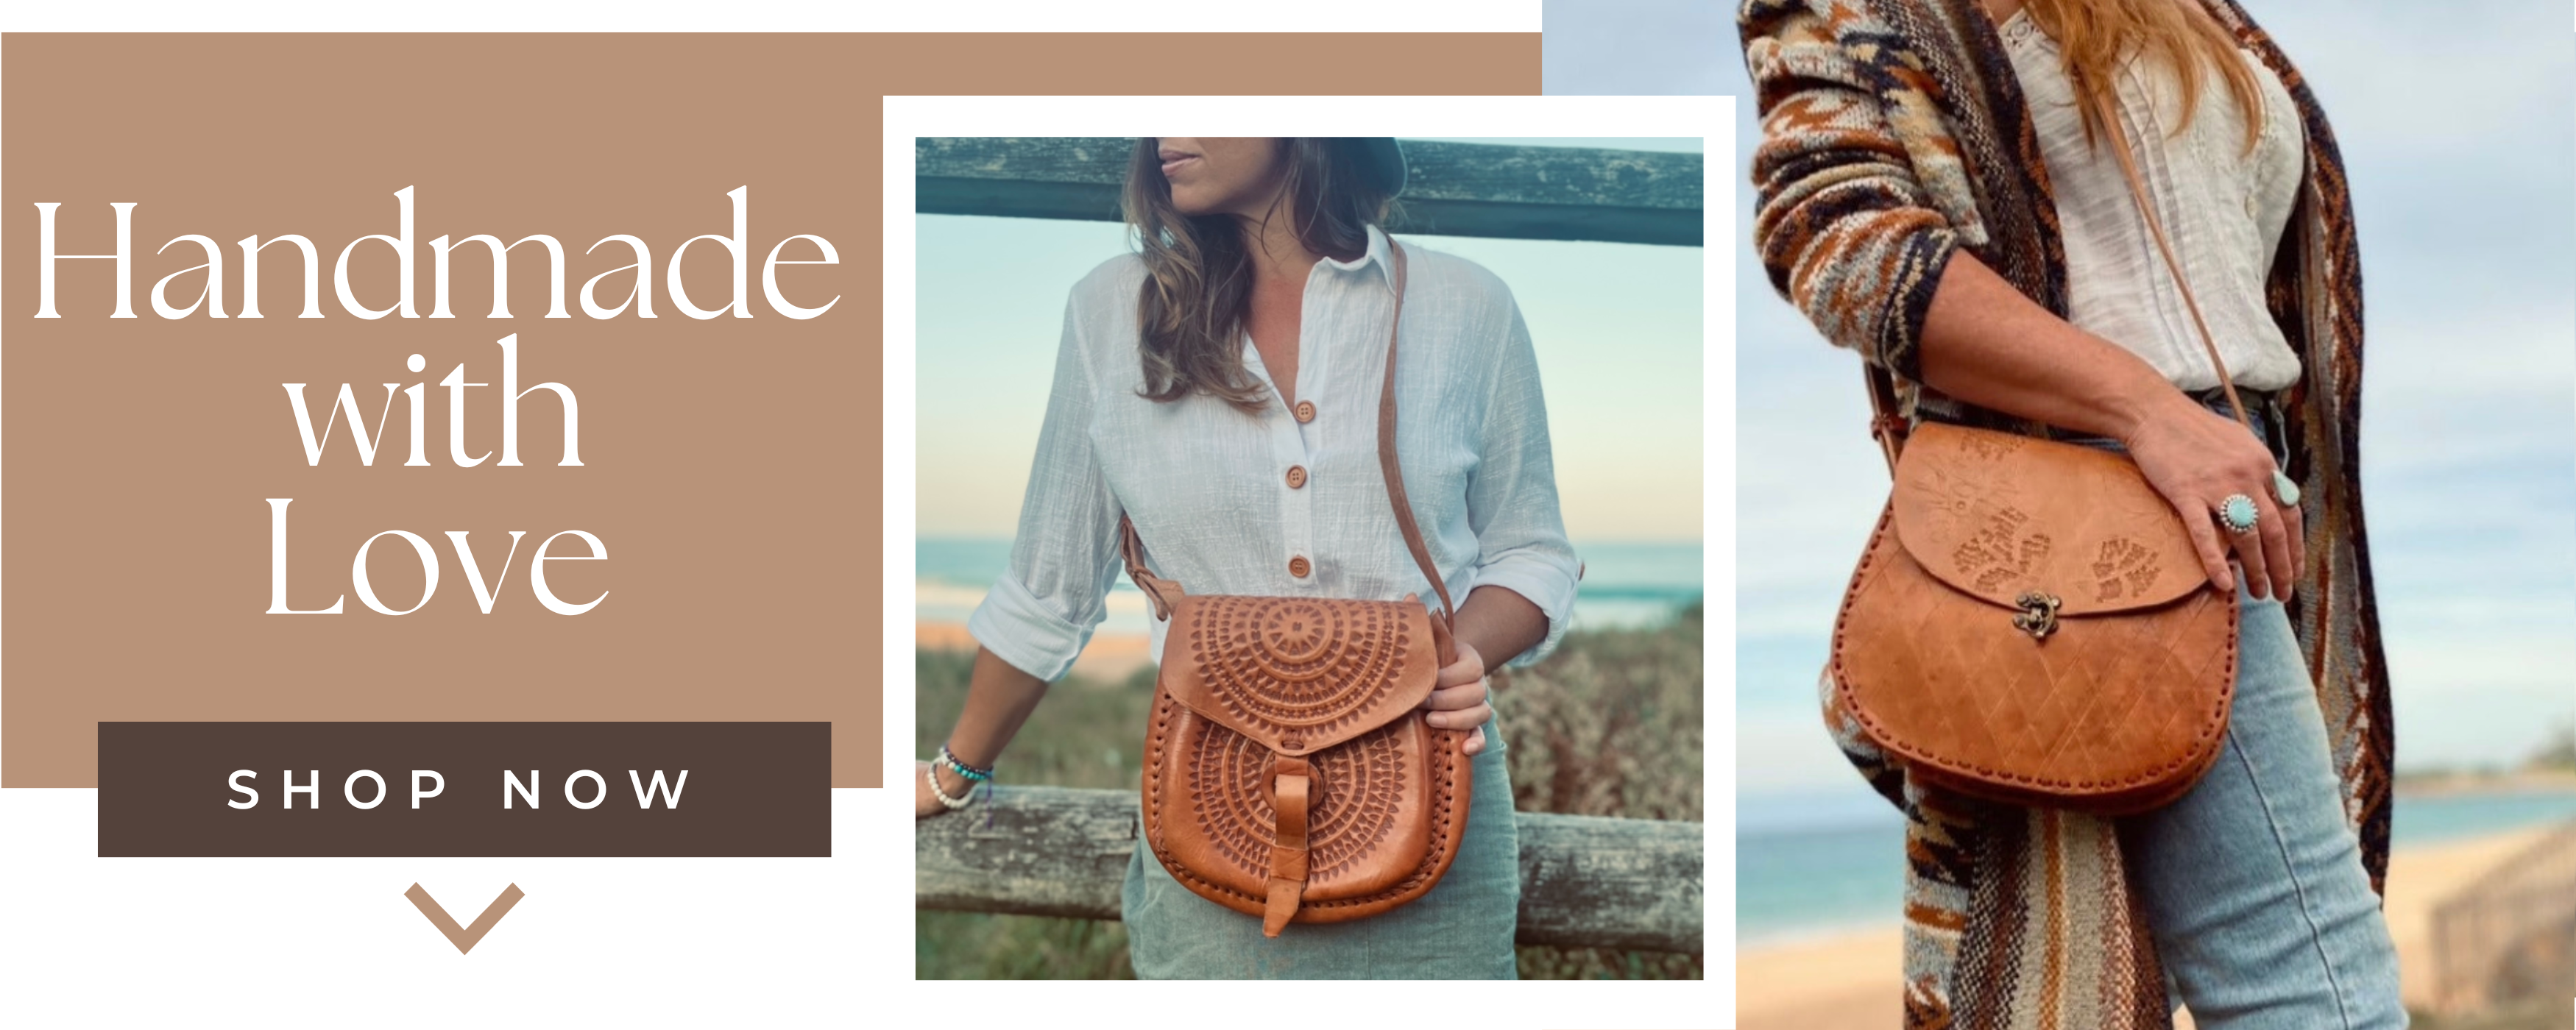 Handbag Trends For Summer 2021 You Need To Know - Stylish Bags